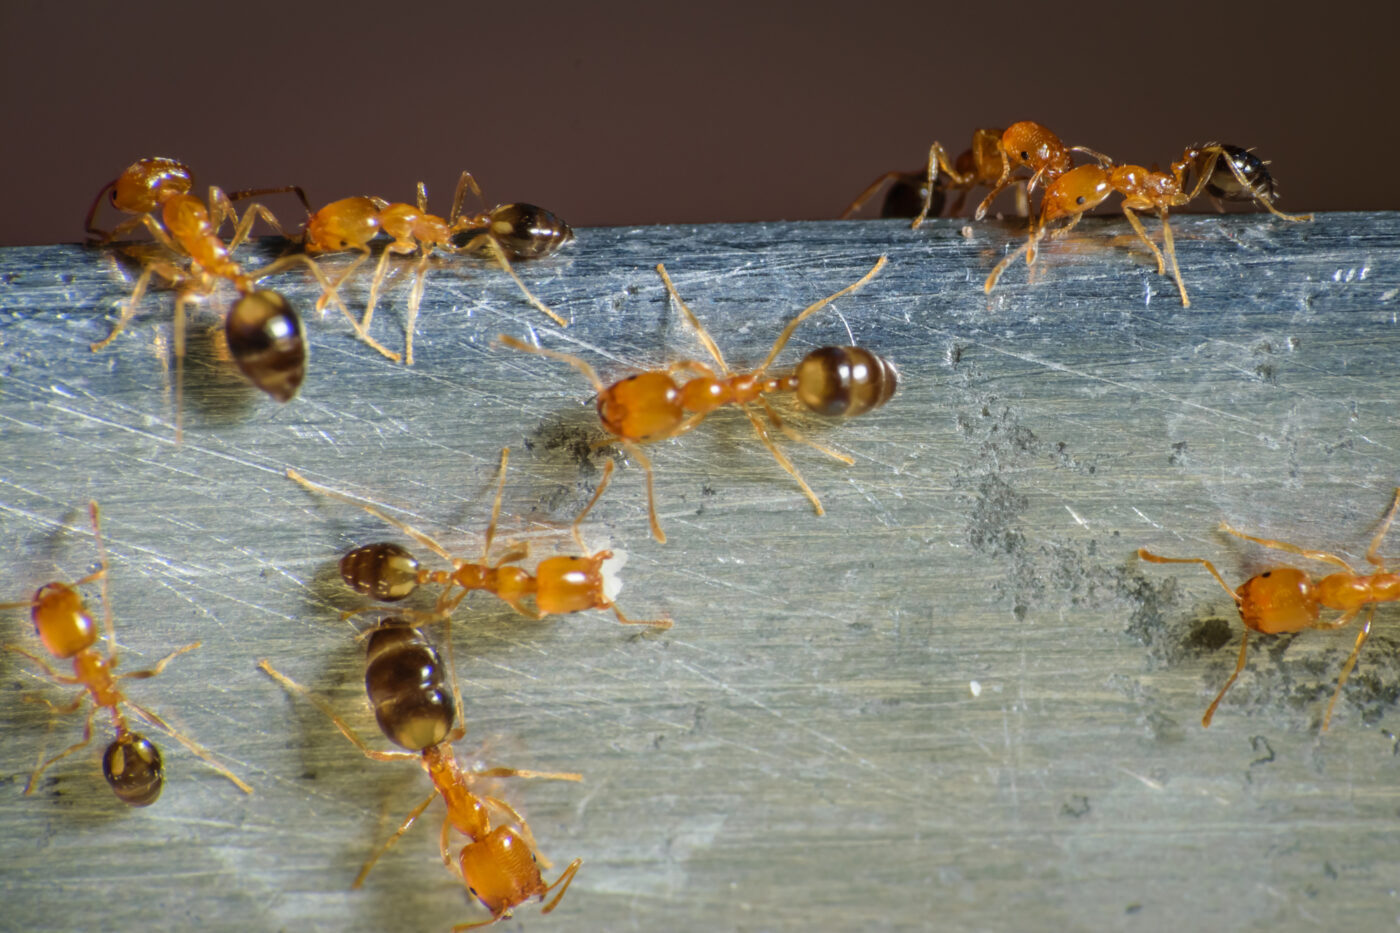 image of a group of pharaoh ants